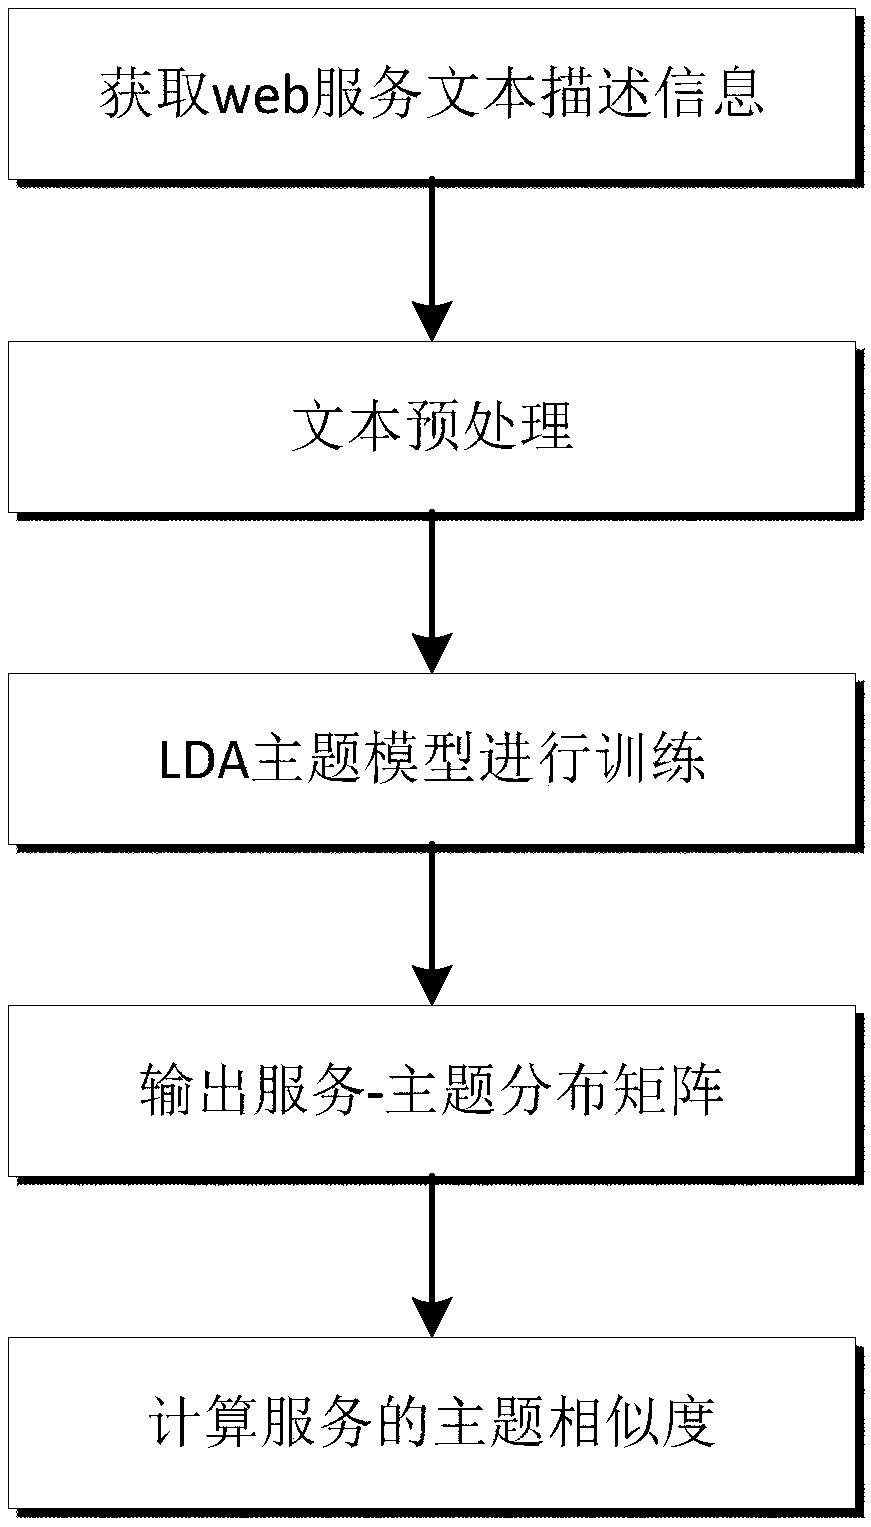 Web service recommendation method based on theme and service combination information